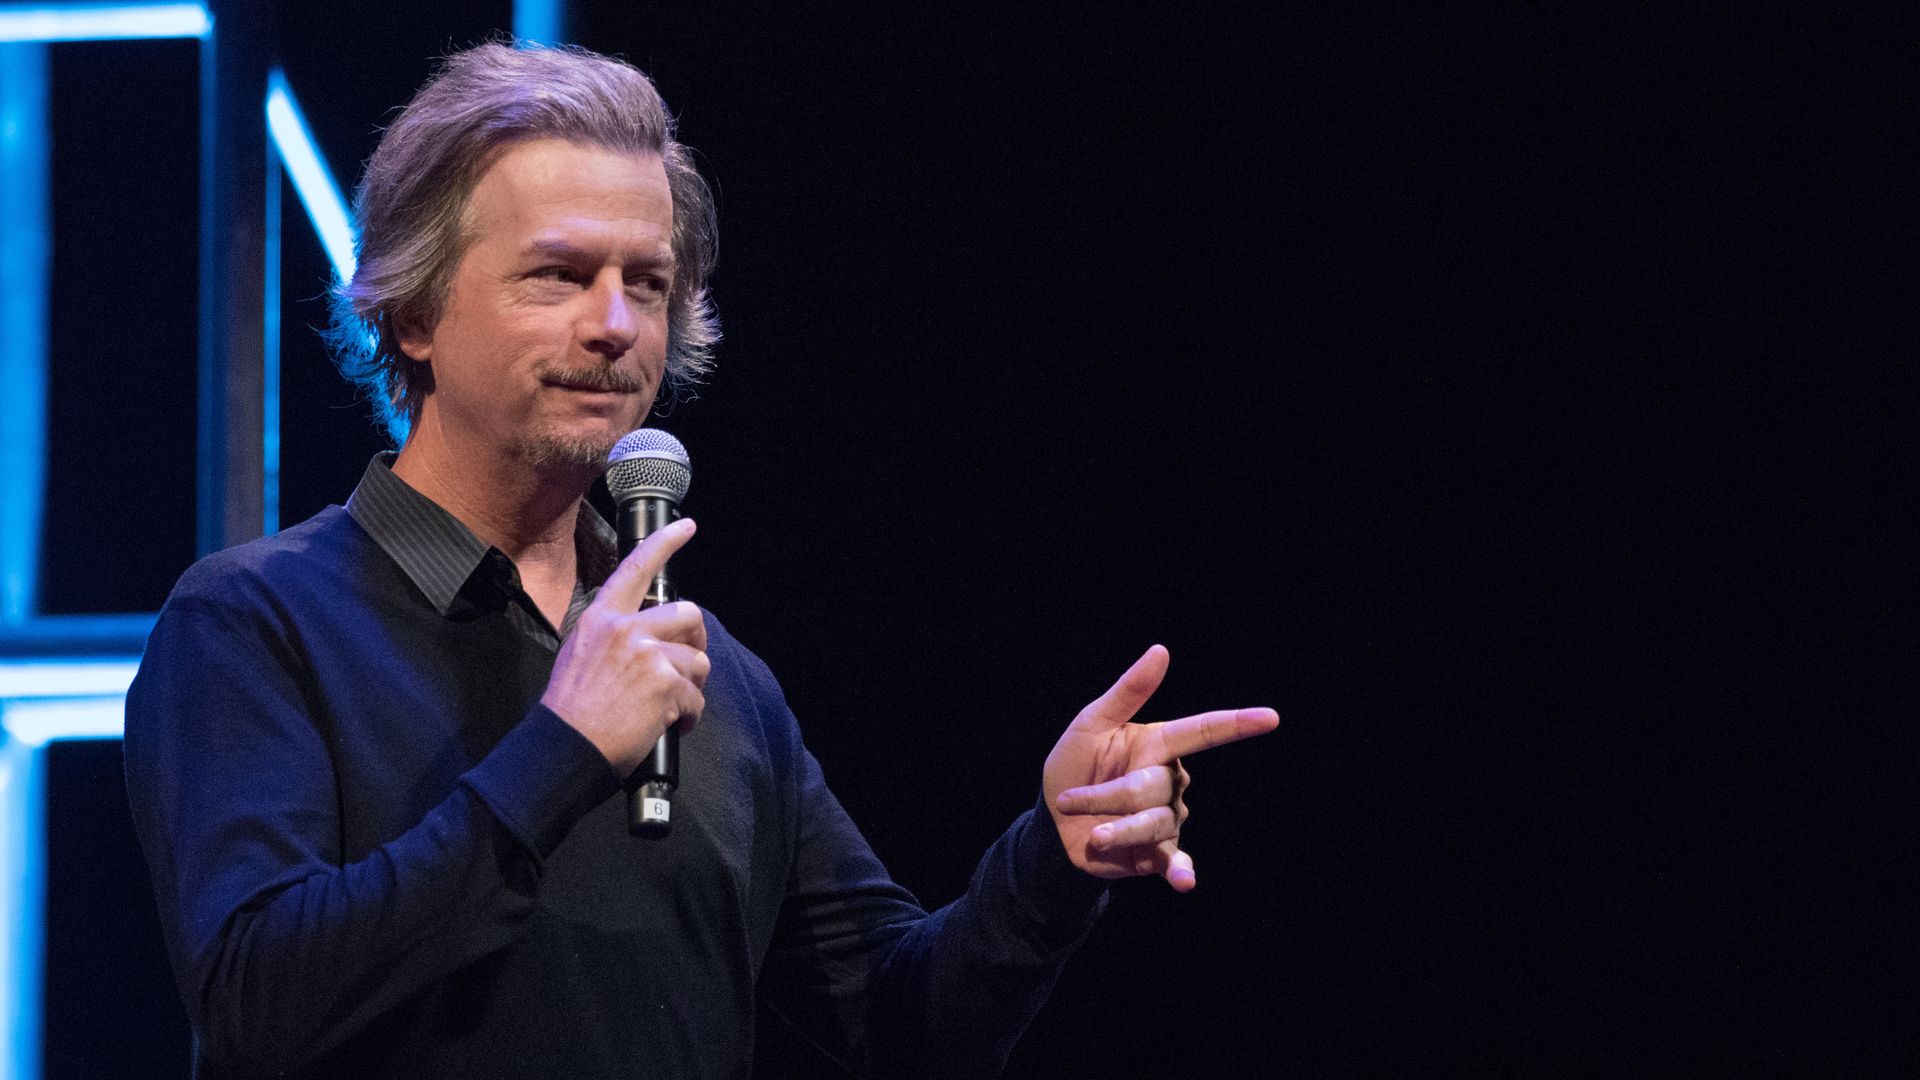 David Spade holding a microphone on stage and pointing